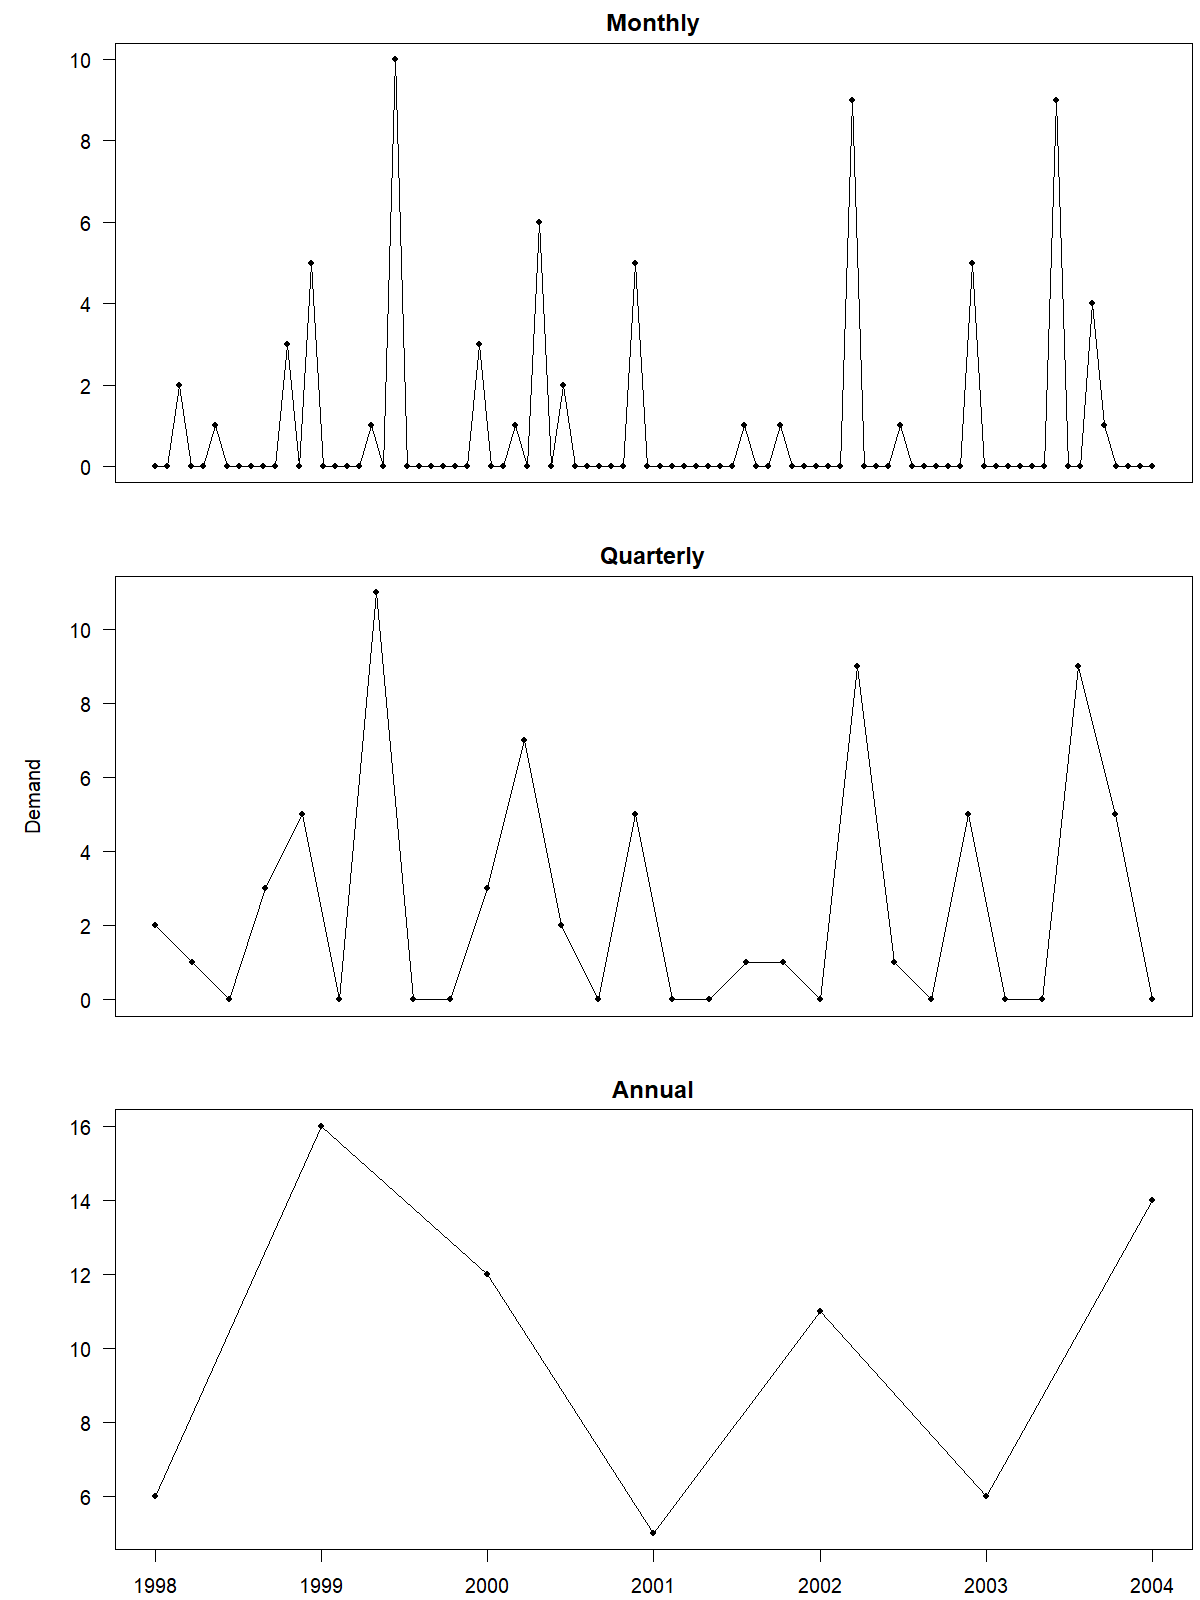 Three panels with a time series each, on top of each other. The common horizontal axis is labeled "Year" and goes from 1998 to 2002. The vertical axes are labeled together "Sales." The top and middle panels' vertical axis goes from 0 to 2, the bottom panel's from 0 to 5. The top panel is labeled "Monthly", the middle one "Quarterly" and the bottom one "Yearly." The top panel shows the original intermittent monthly time series. The middle panel shows the data aggregated by quarter, which is still intermittent. The bottom panel shows the data aggregated by year, which is not intermittent any more.